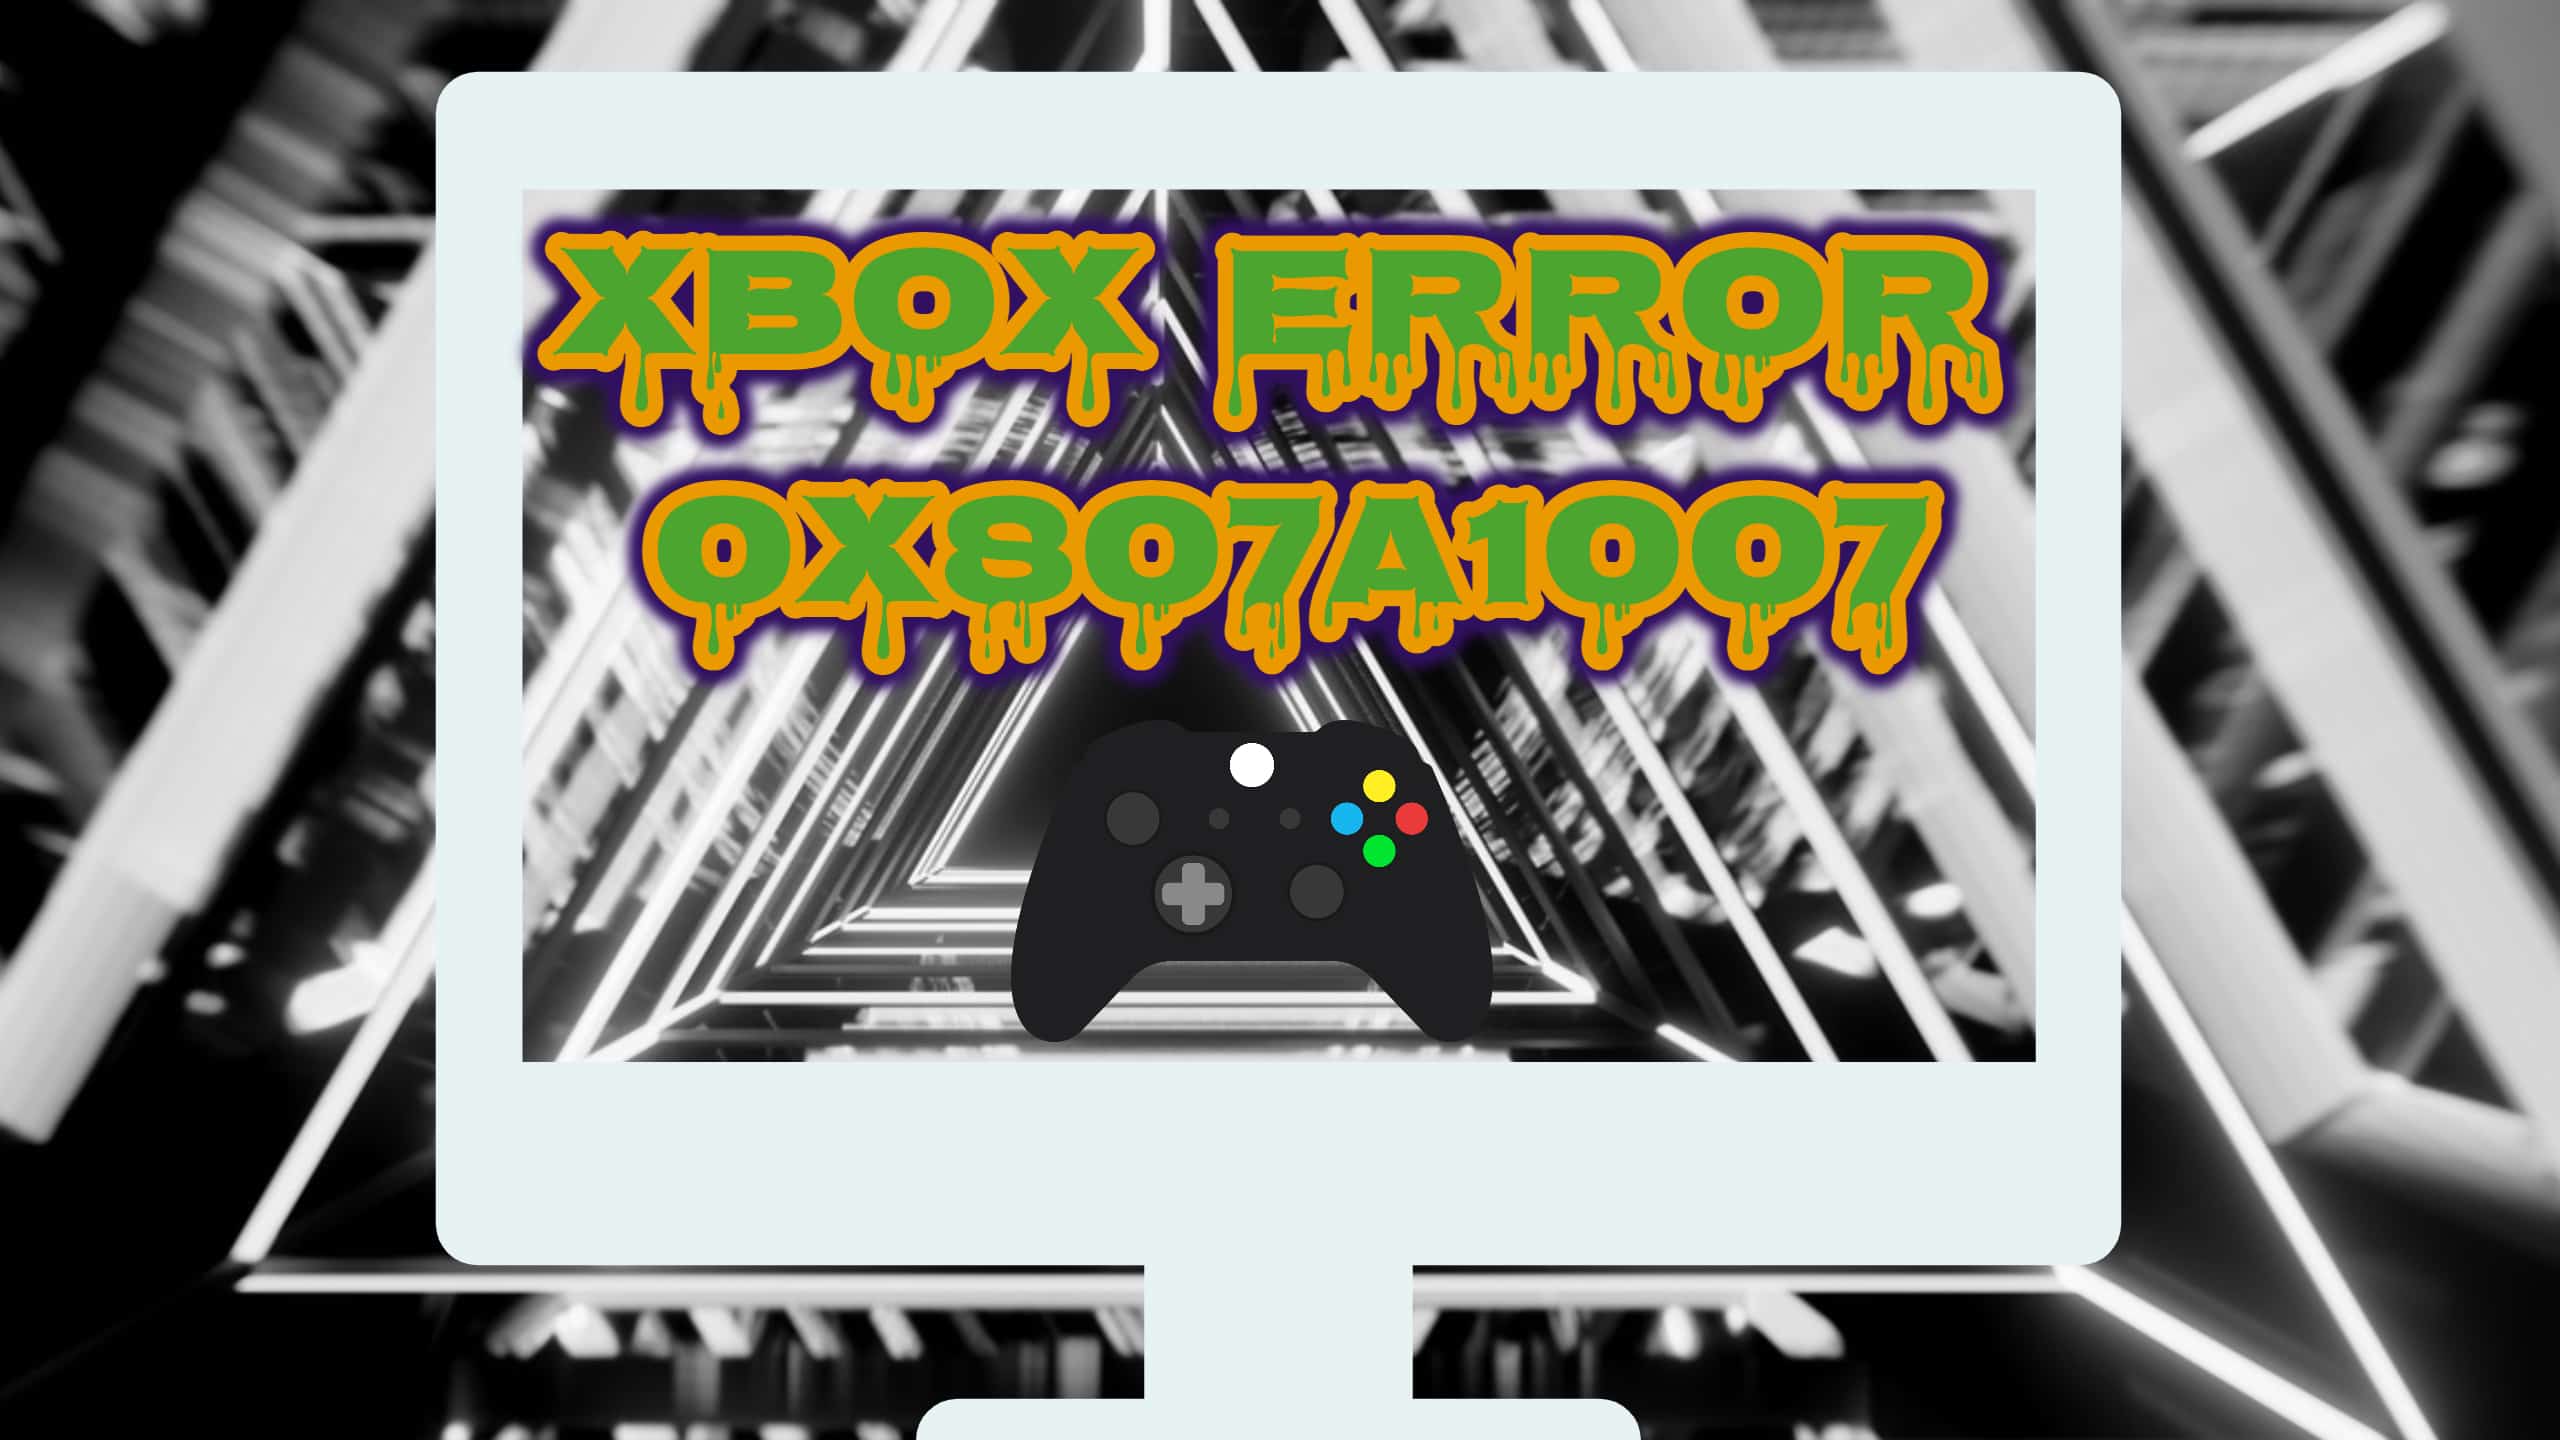 The Featured Image Of Xbox Error 0x807a1007